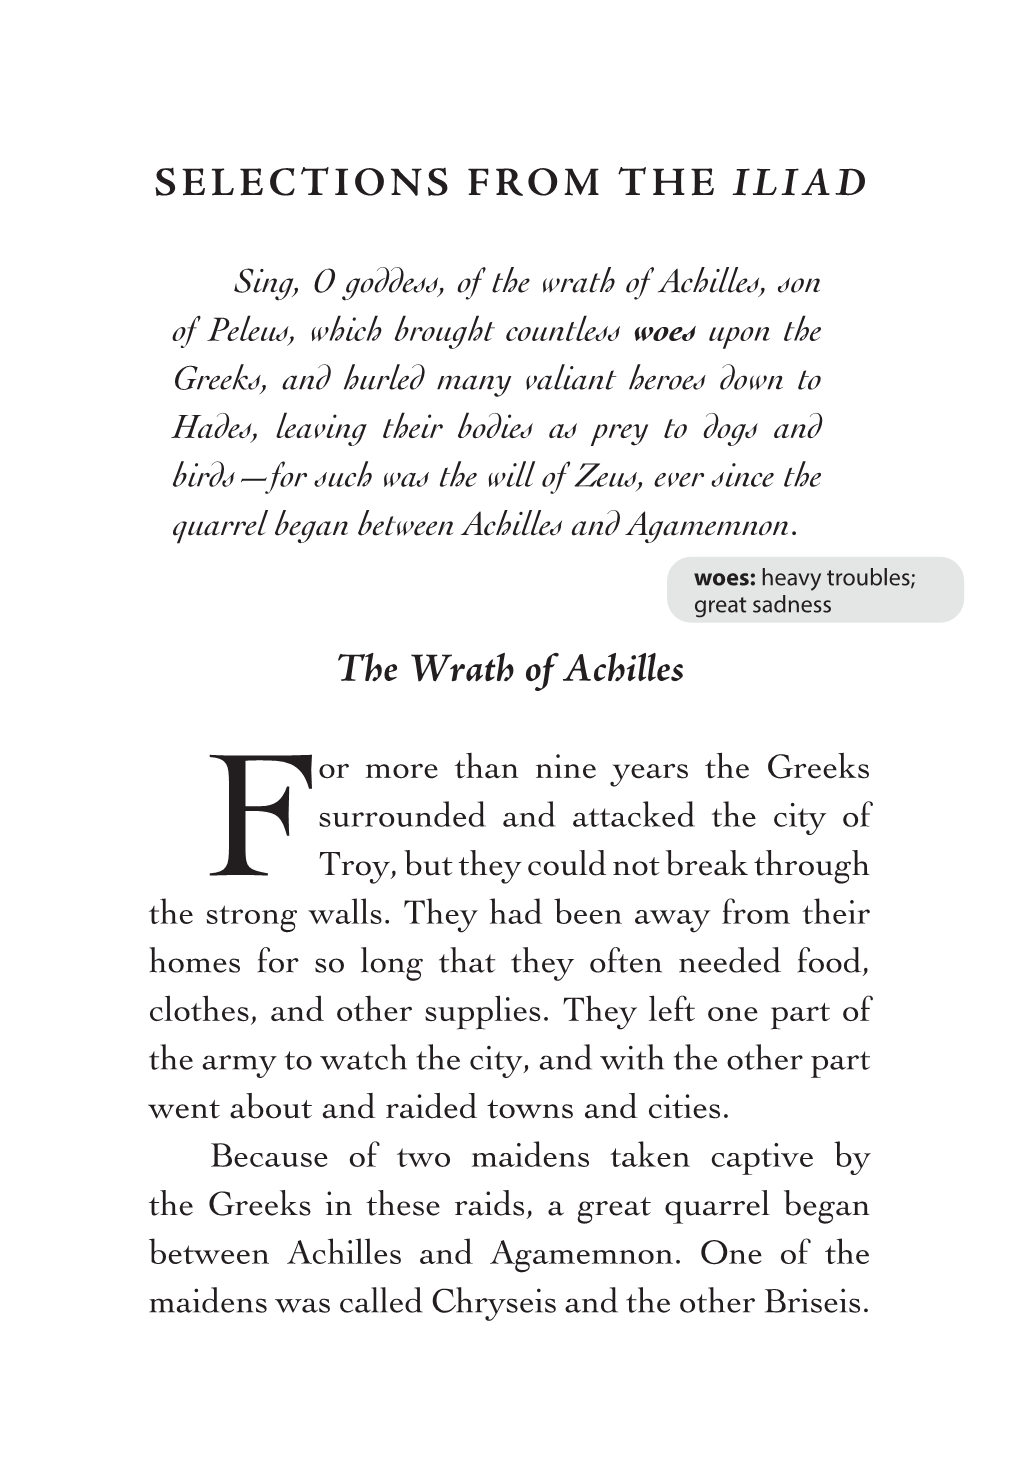 SELECTIONS from the ILIAD the Wrath of Achilles